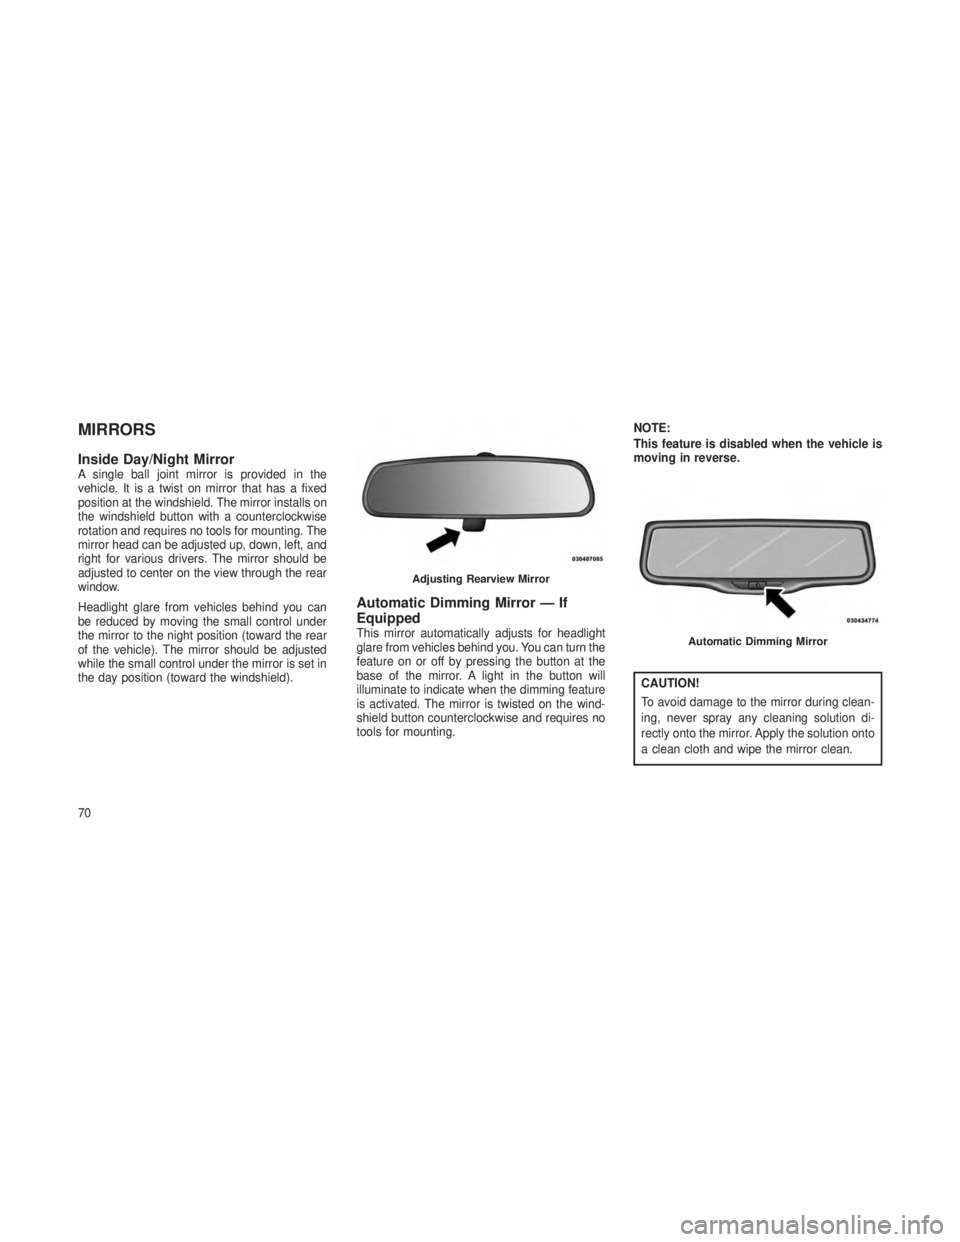 JEEP GRAND CHEROKEE 2013  Owner handbook (in English) MIRRORS
Inside Day/Night MirrorA single ball joint mirror is provided in the
vehicle. It is a twist on mirror that has a fixed
position at the windshield. The mirror installs on
the windshield button 